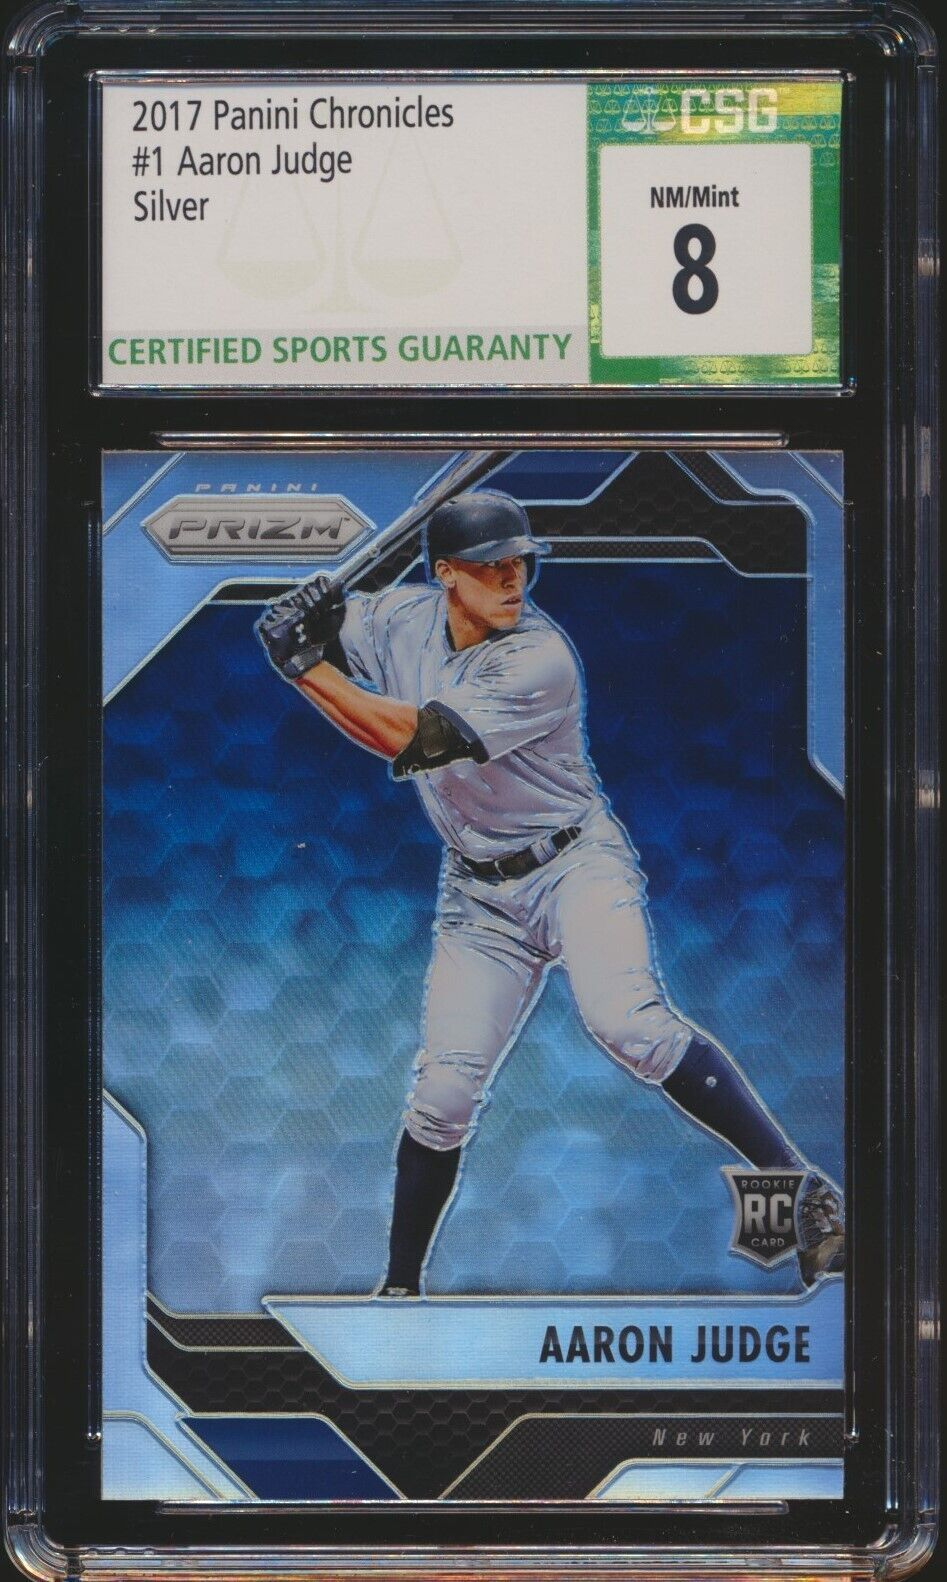 Most valuable Aaron Judge rookie cards: 2017 Panini Chronicles Aaron Judge Rookie Card #8